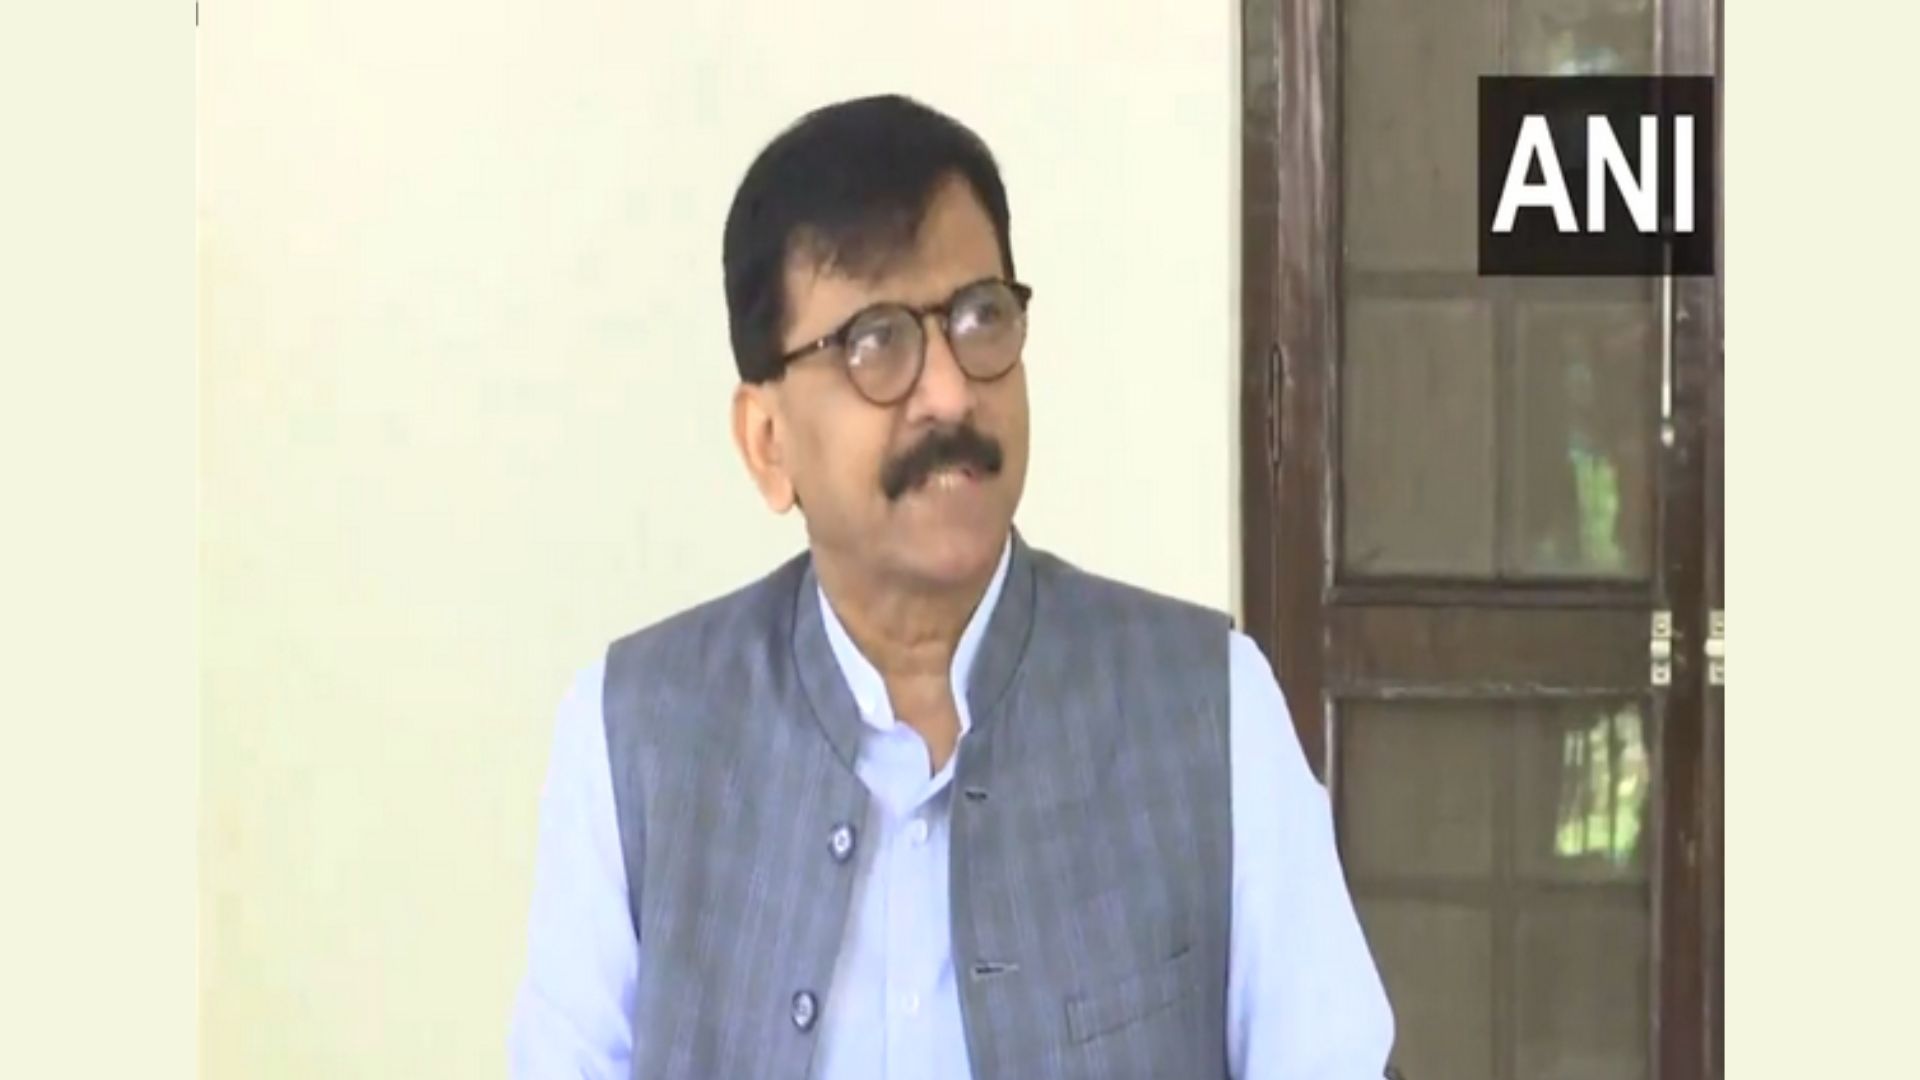 Upcoming INDIA Bloc Meeting Confirmed by UBT Sena’s Sanjay Raut, Dates Fixed for Mid-December